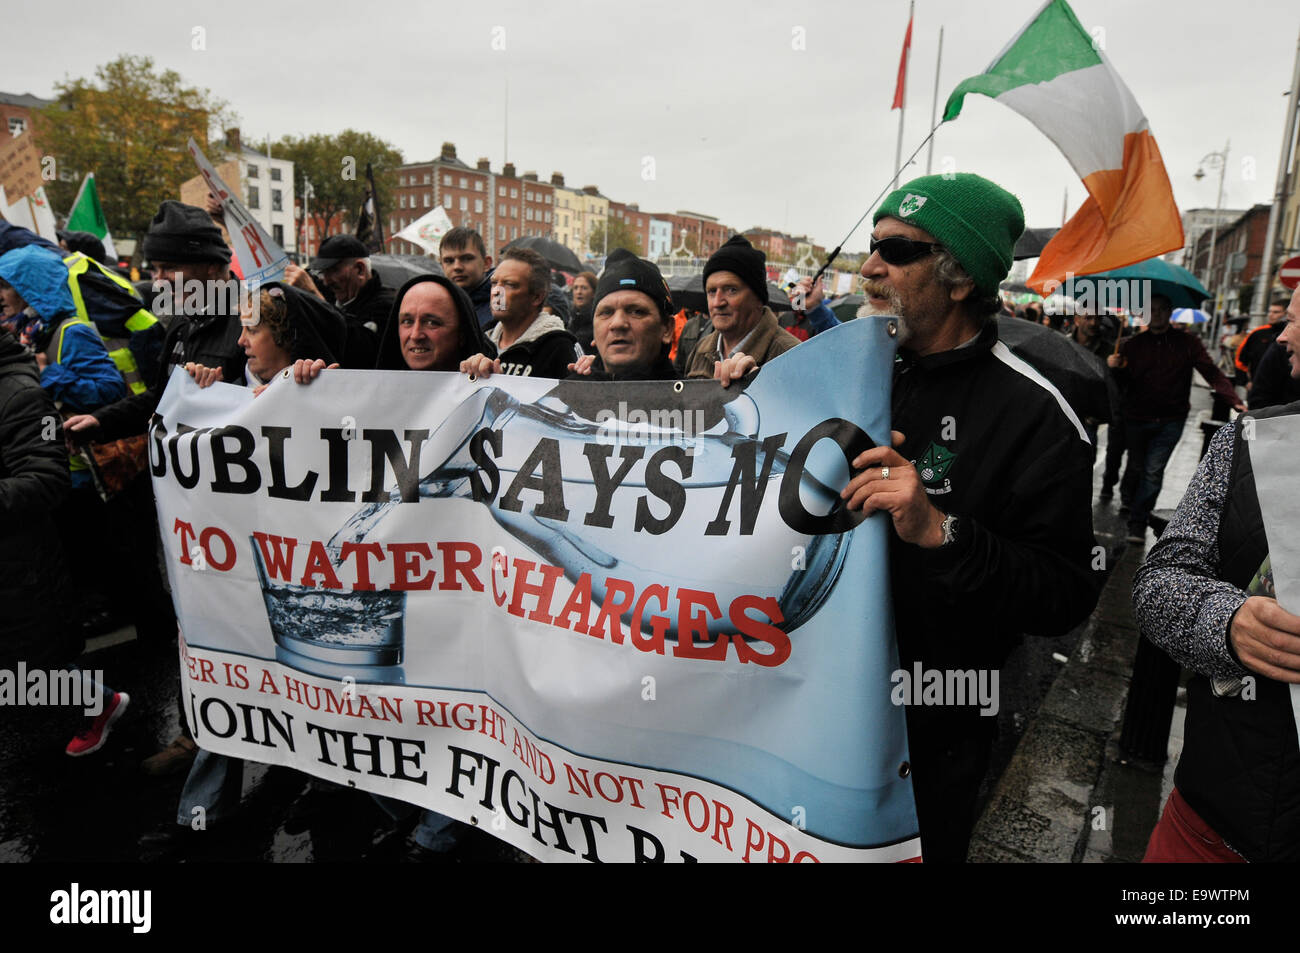 Protest against the water charges in Ireland. They marched around the Liffey and Thousands more protested throughout Ireland. Stock Photo